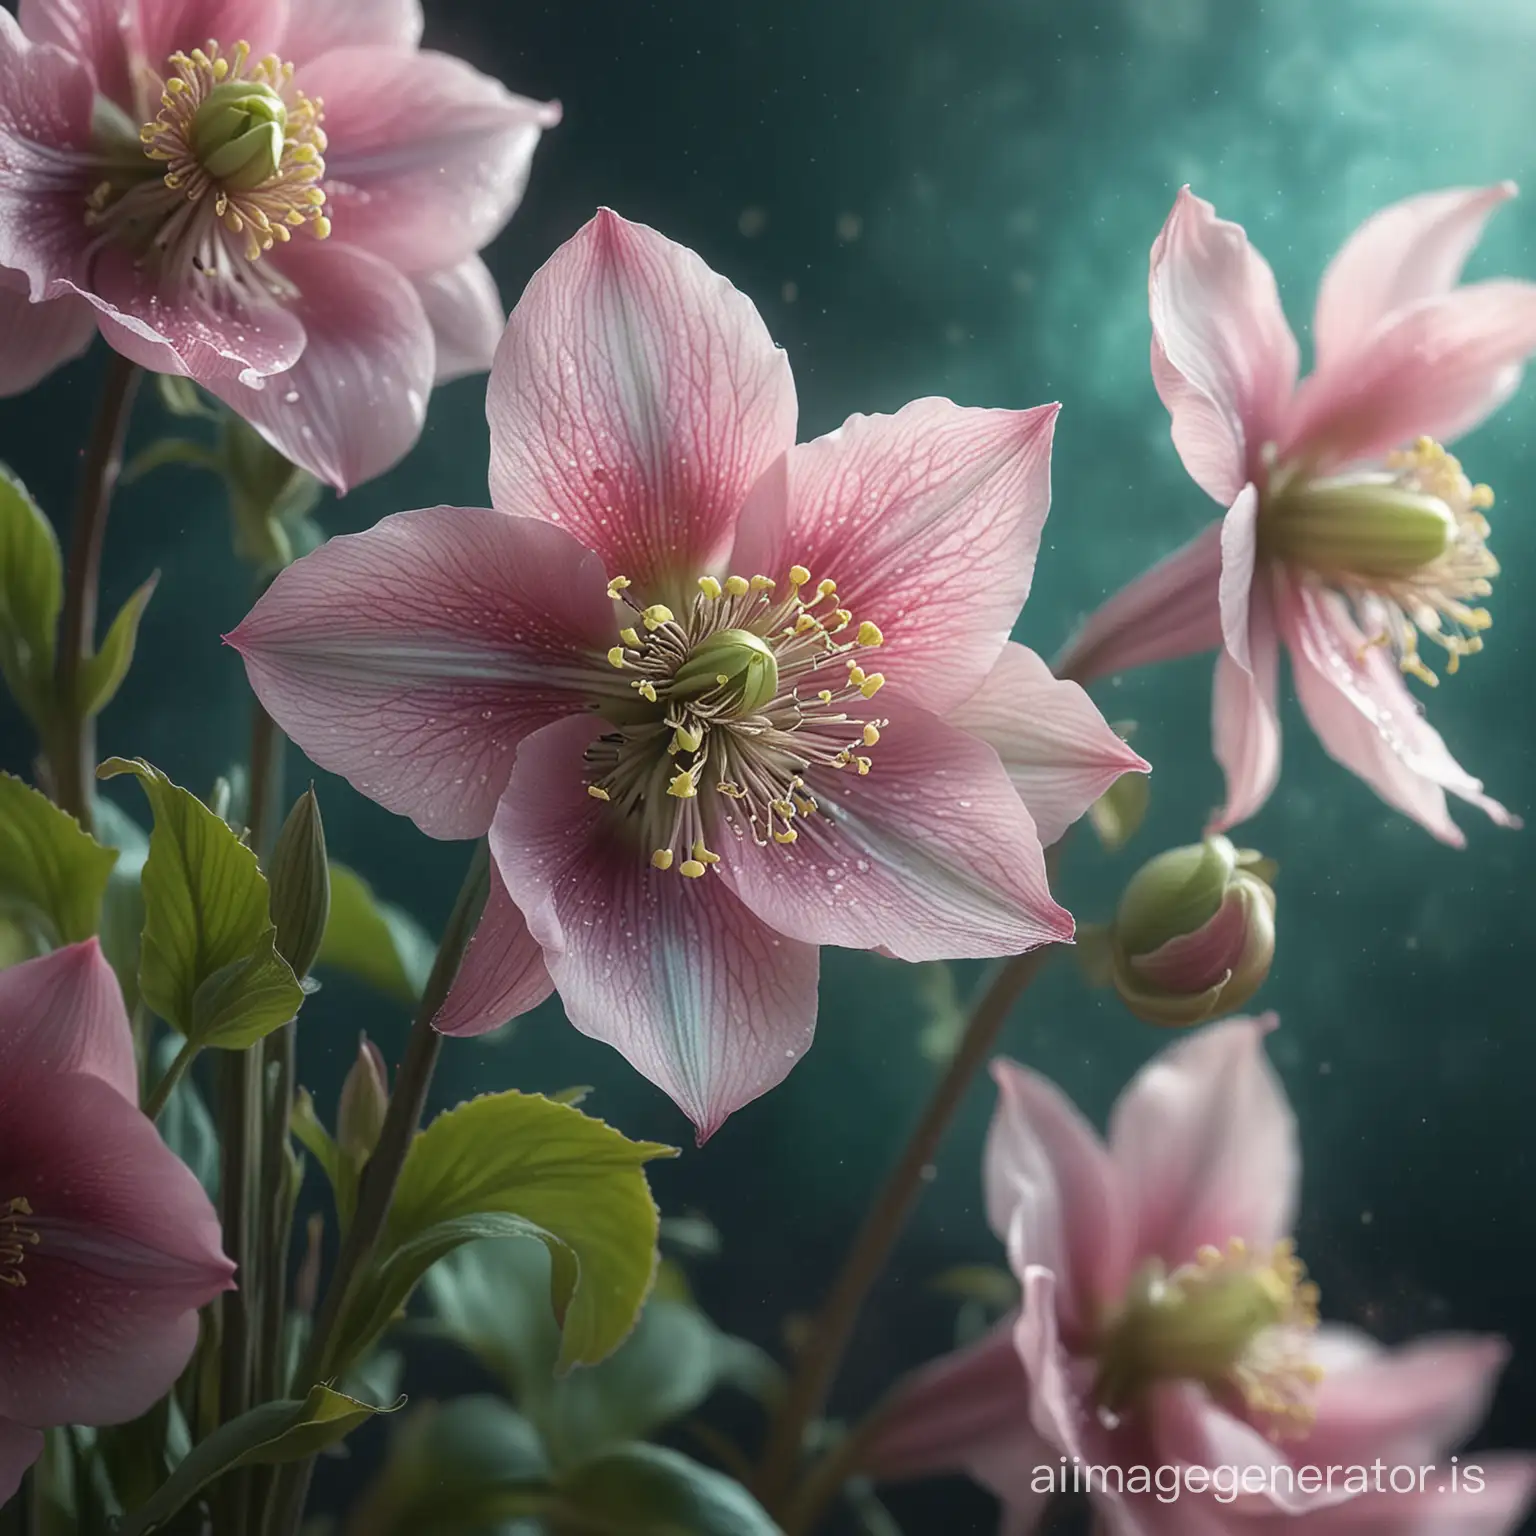 Epic-Cinematic-Portrayal-of-Turquoise-and-Pink-Hellebore-Flowers-Illuminated-by-Northern-Lights